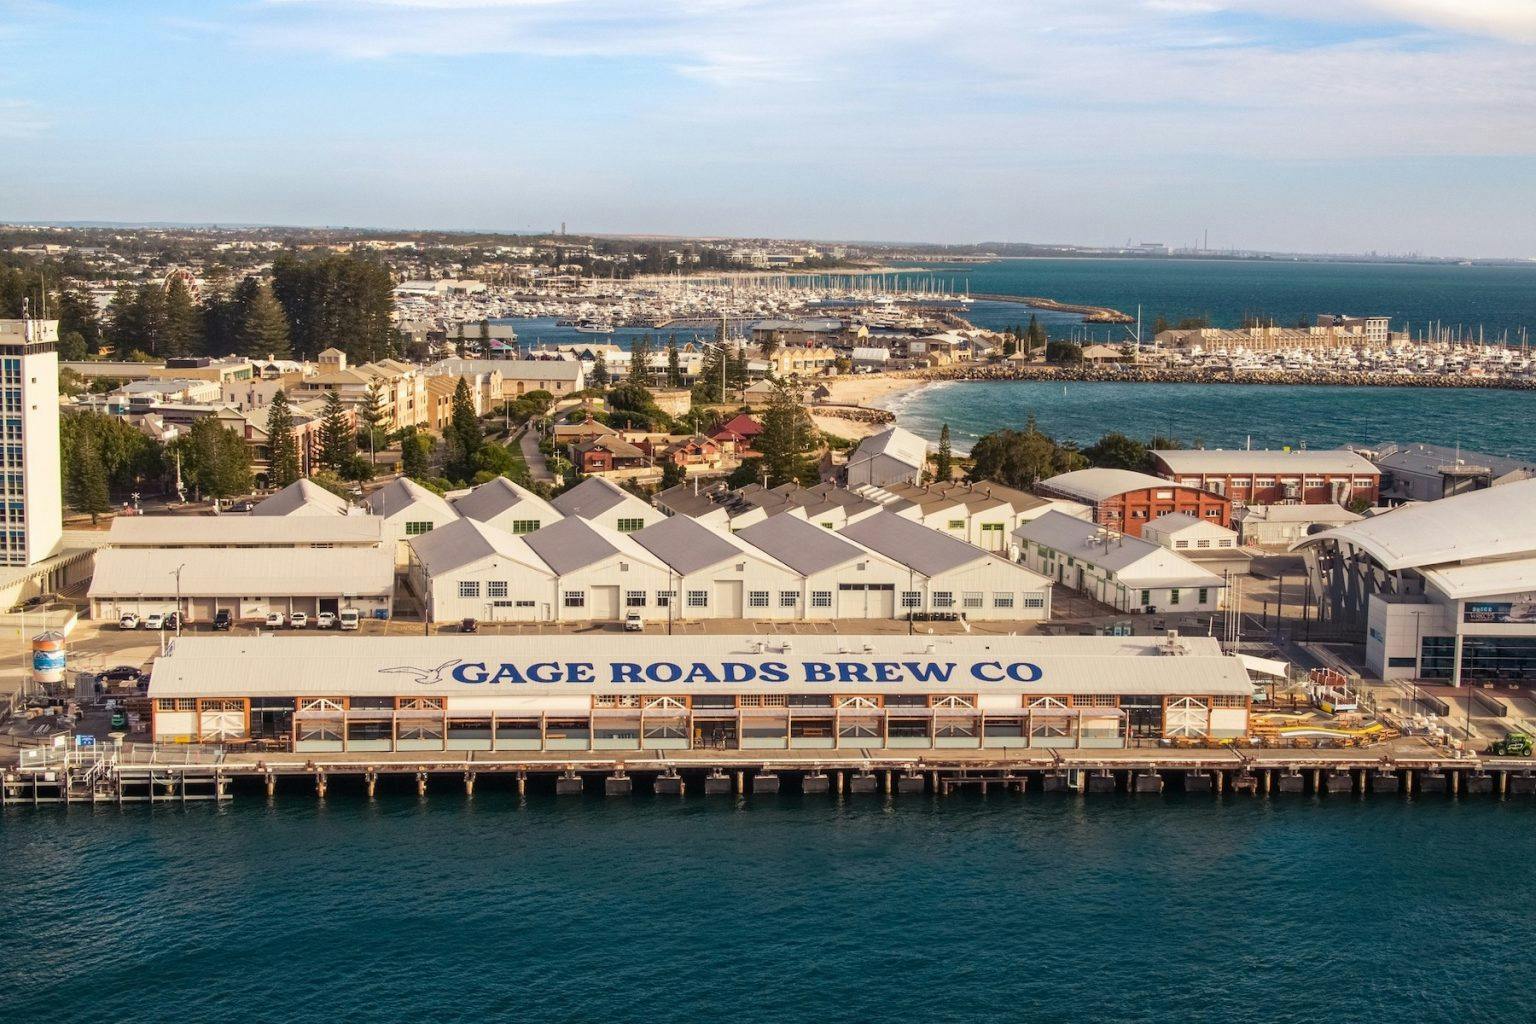 Kid-friendly cafes, bars and restaurants in and around Fremantle, Gage Roads